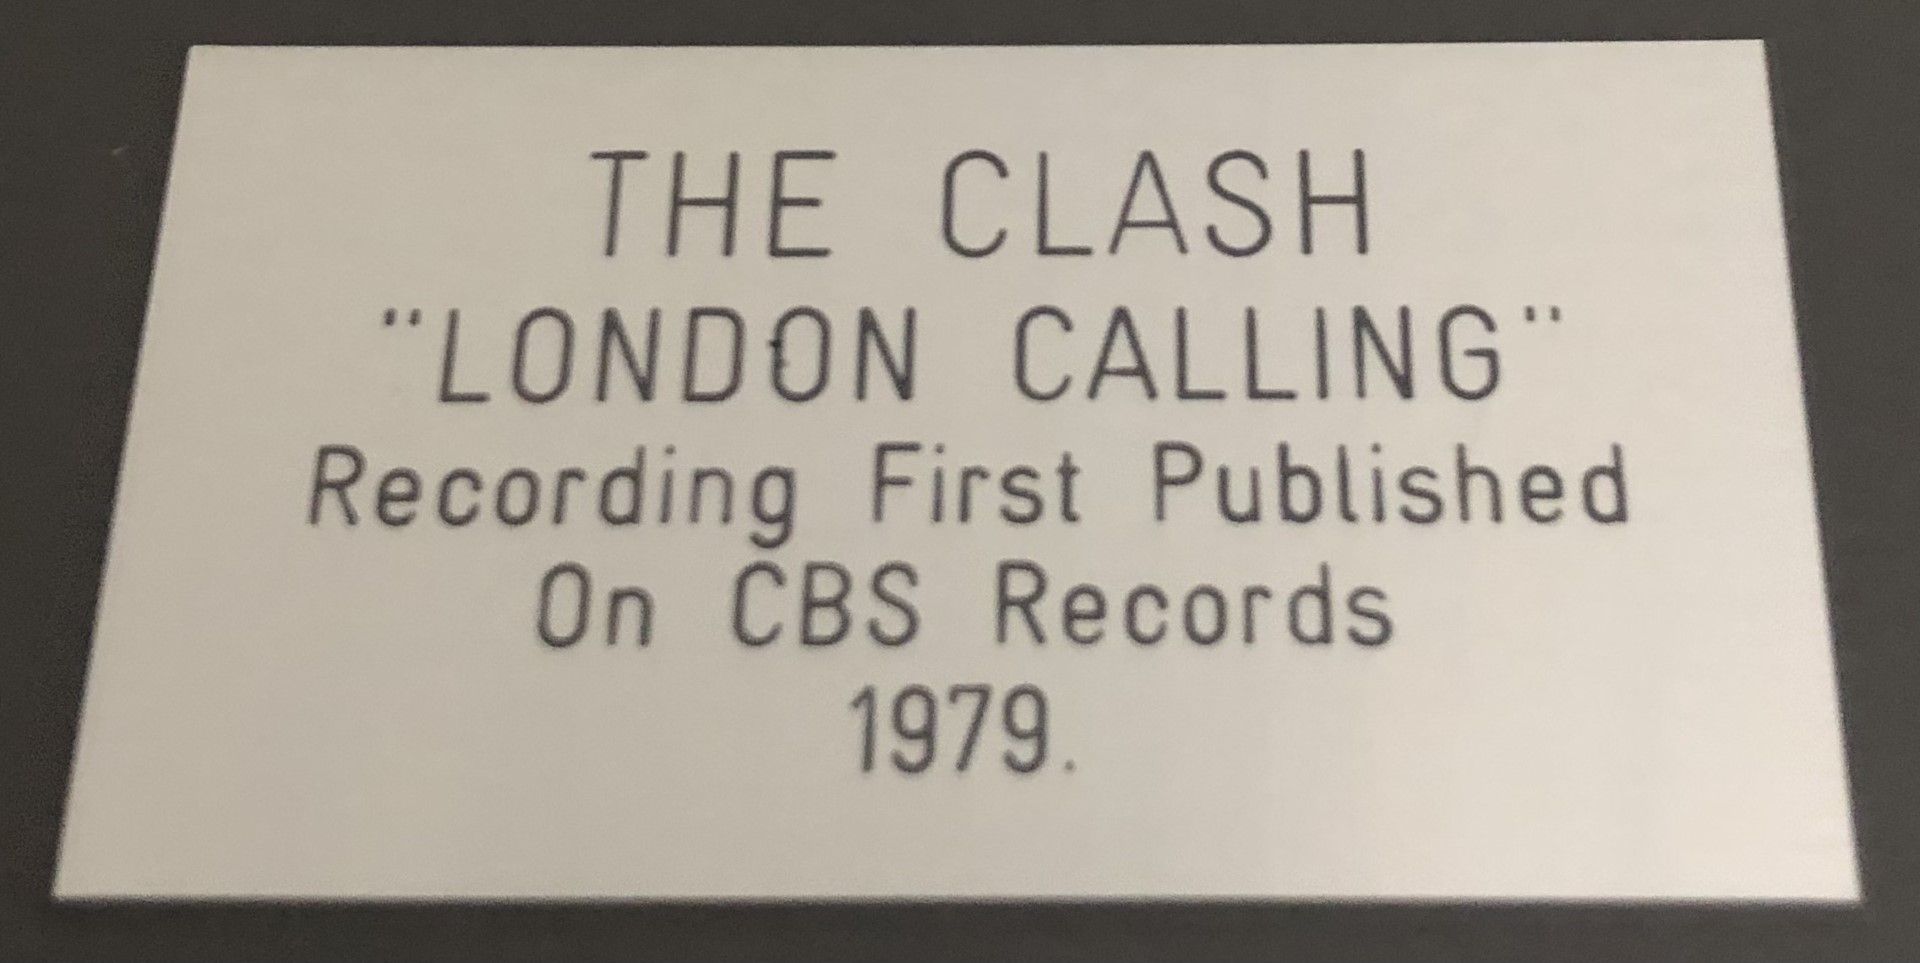 1 x THE CLASH Silver 7 Inch Vinyl Record - LONDON CALLING - Image 2 of 5